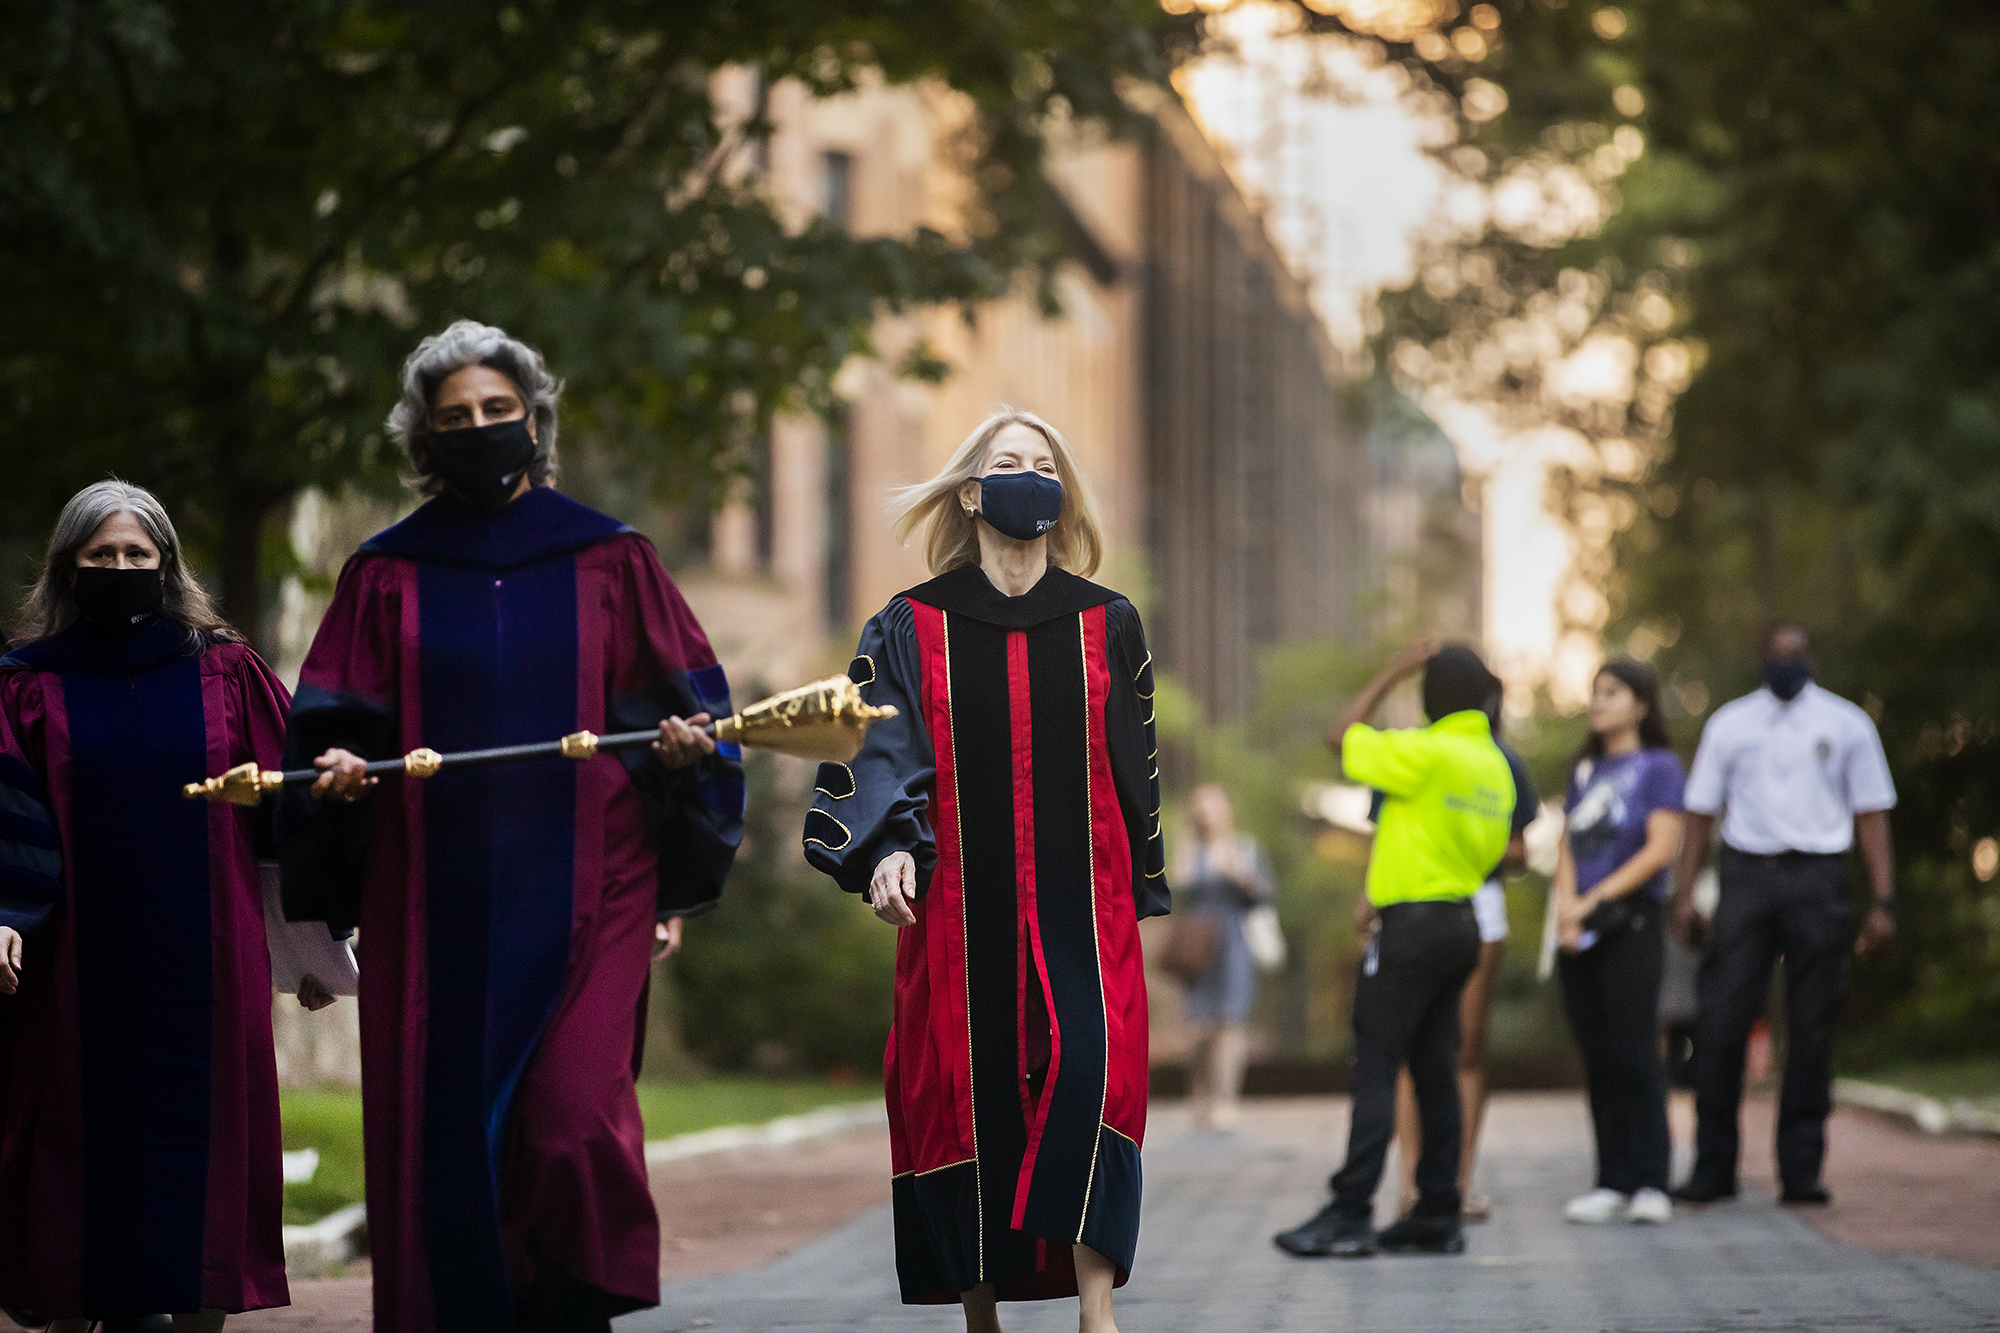 Amy Gutmann in convocation regalia on Locust Walk with Medha Narvekar on her right.